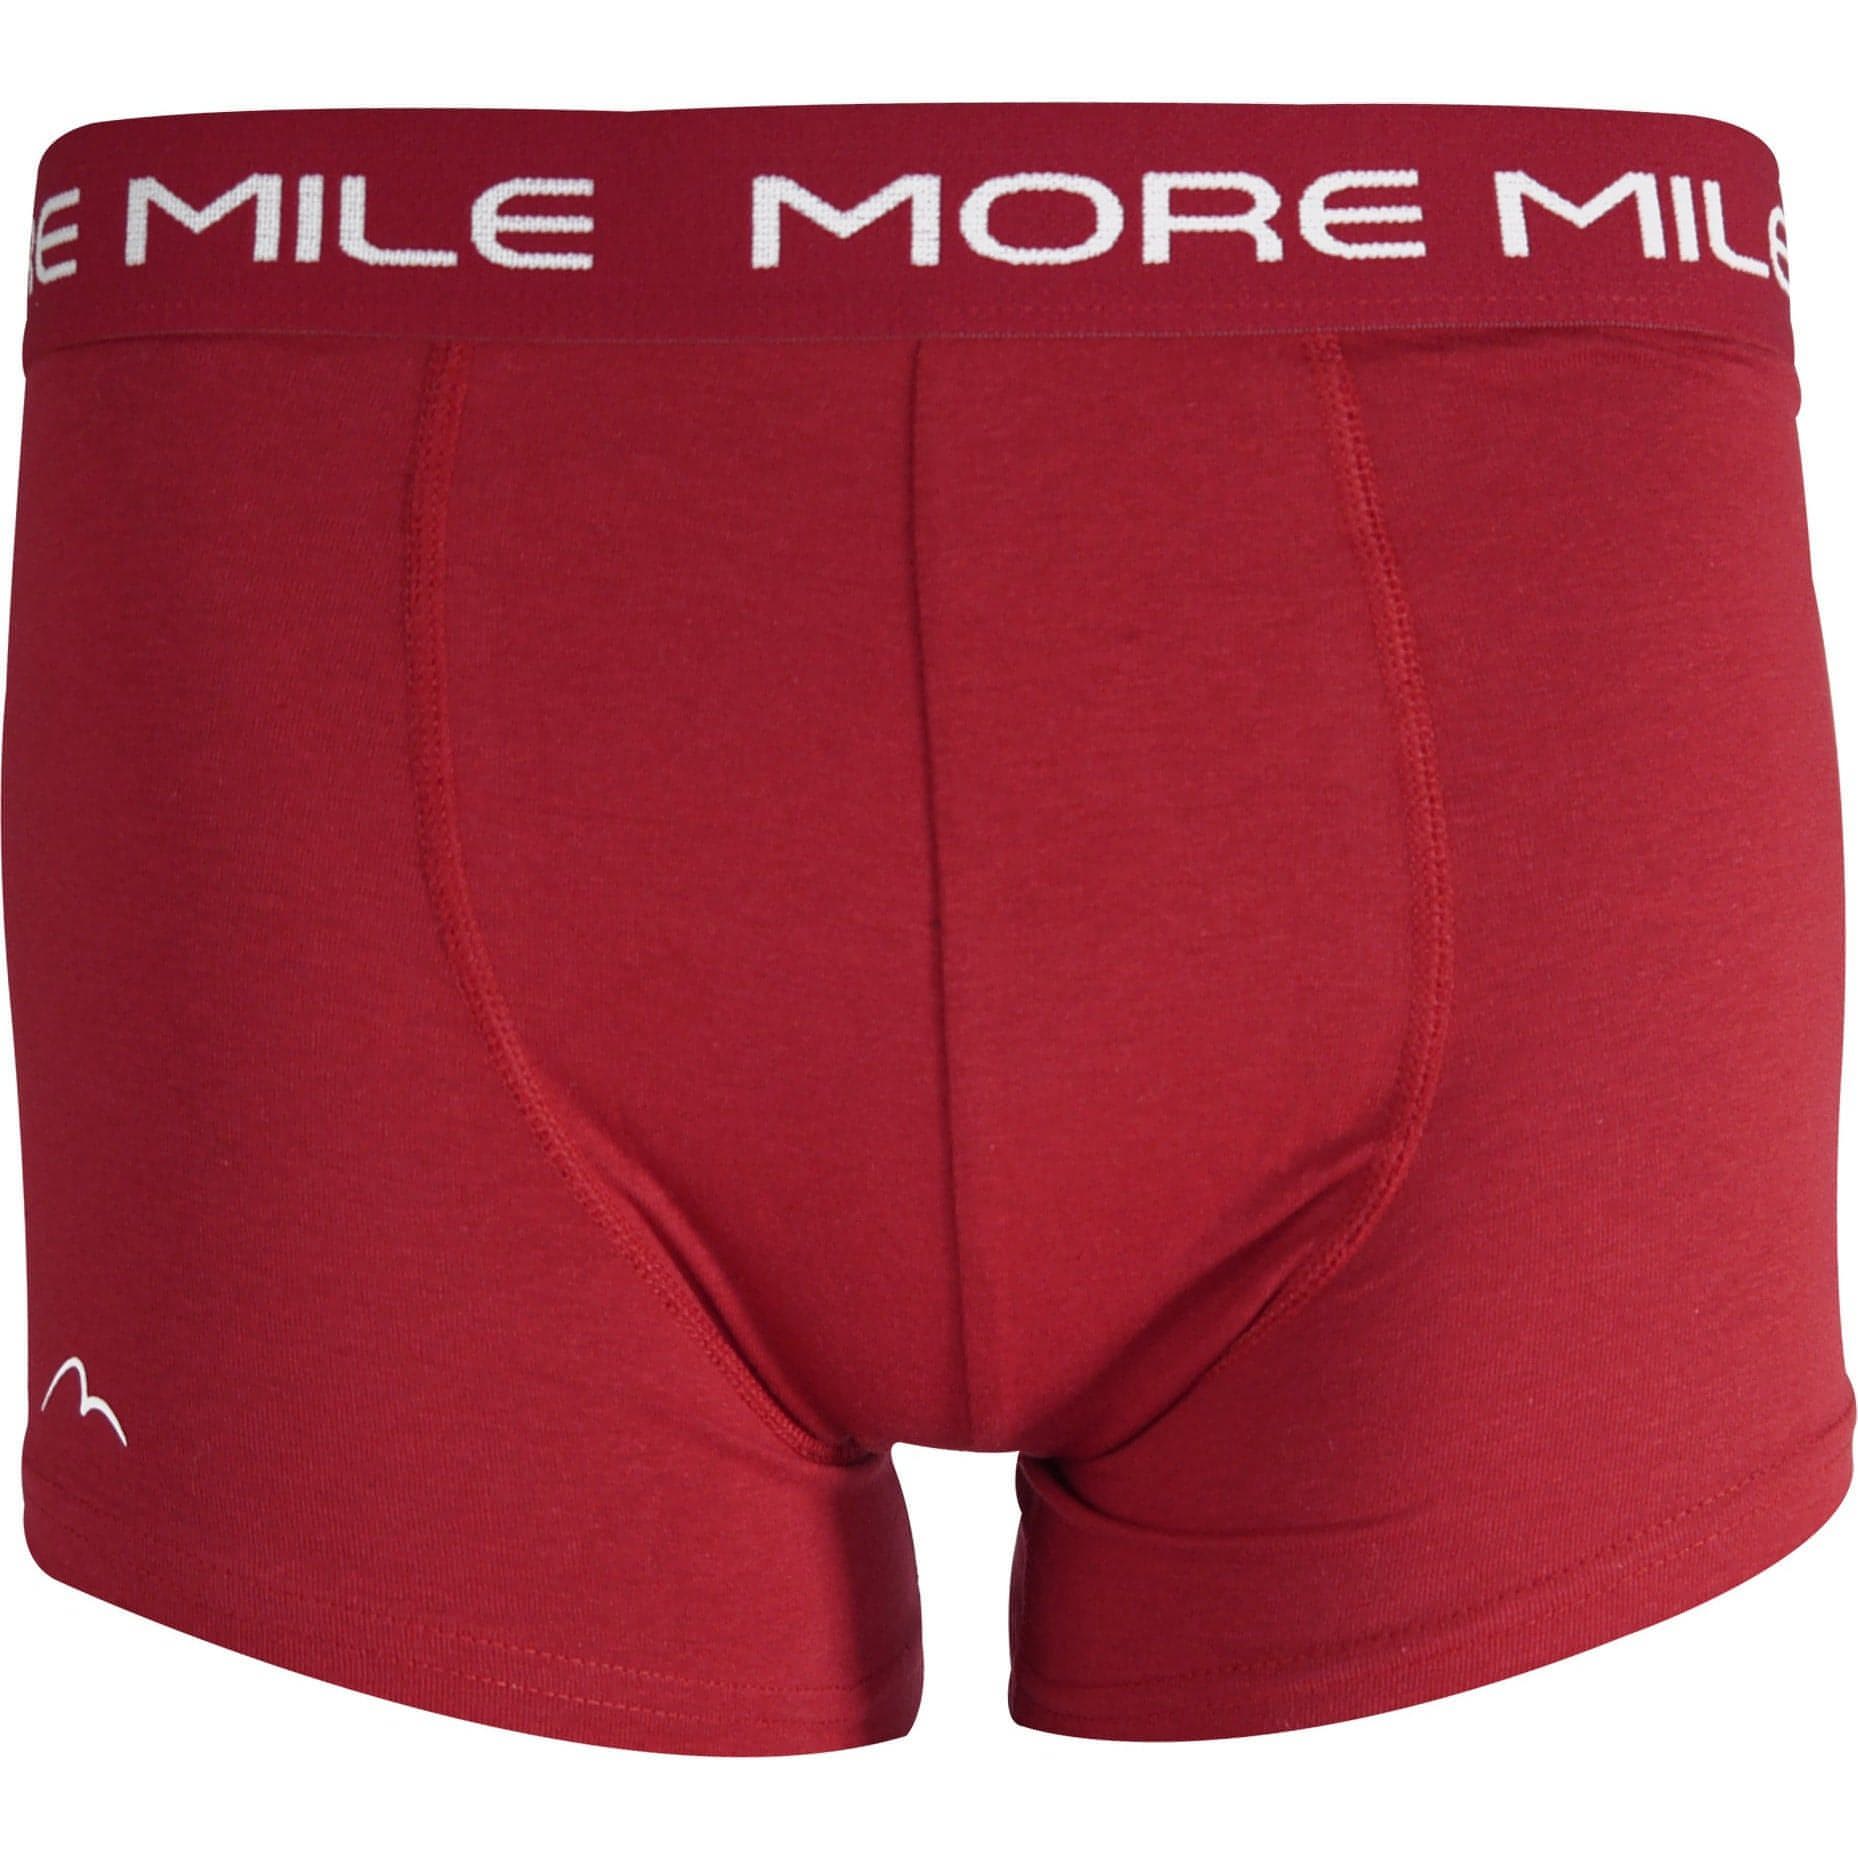 More Mile Pack Boxer 1P204881Wn Blackred Red Front - Front View